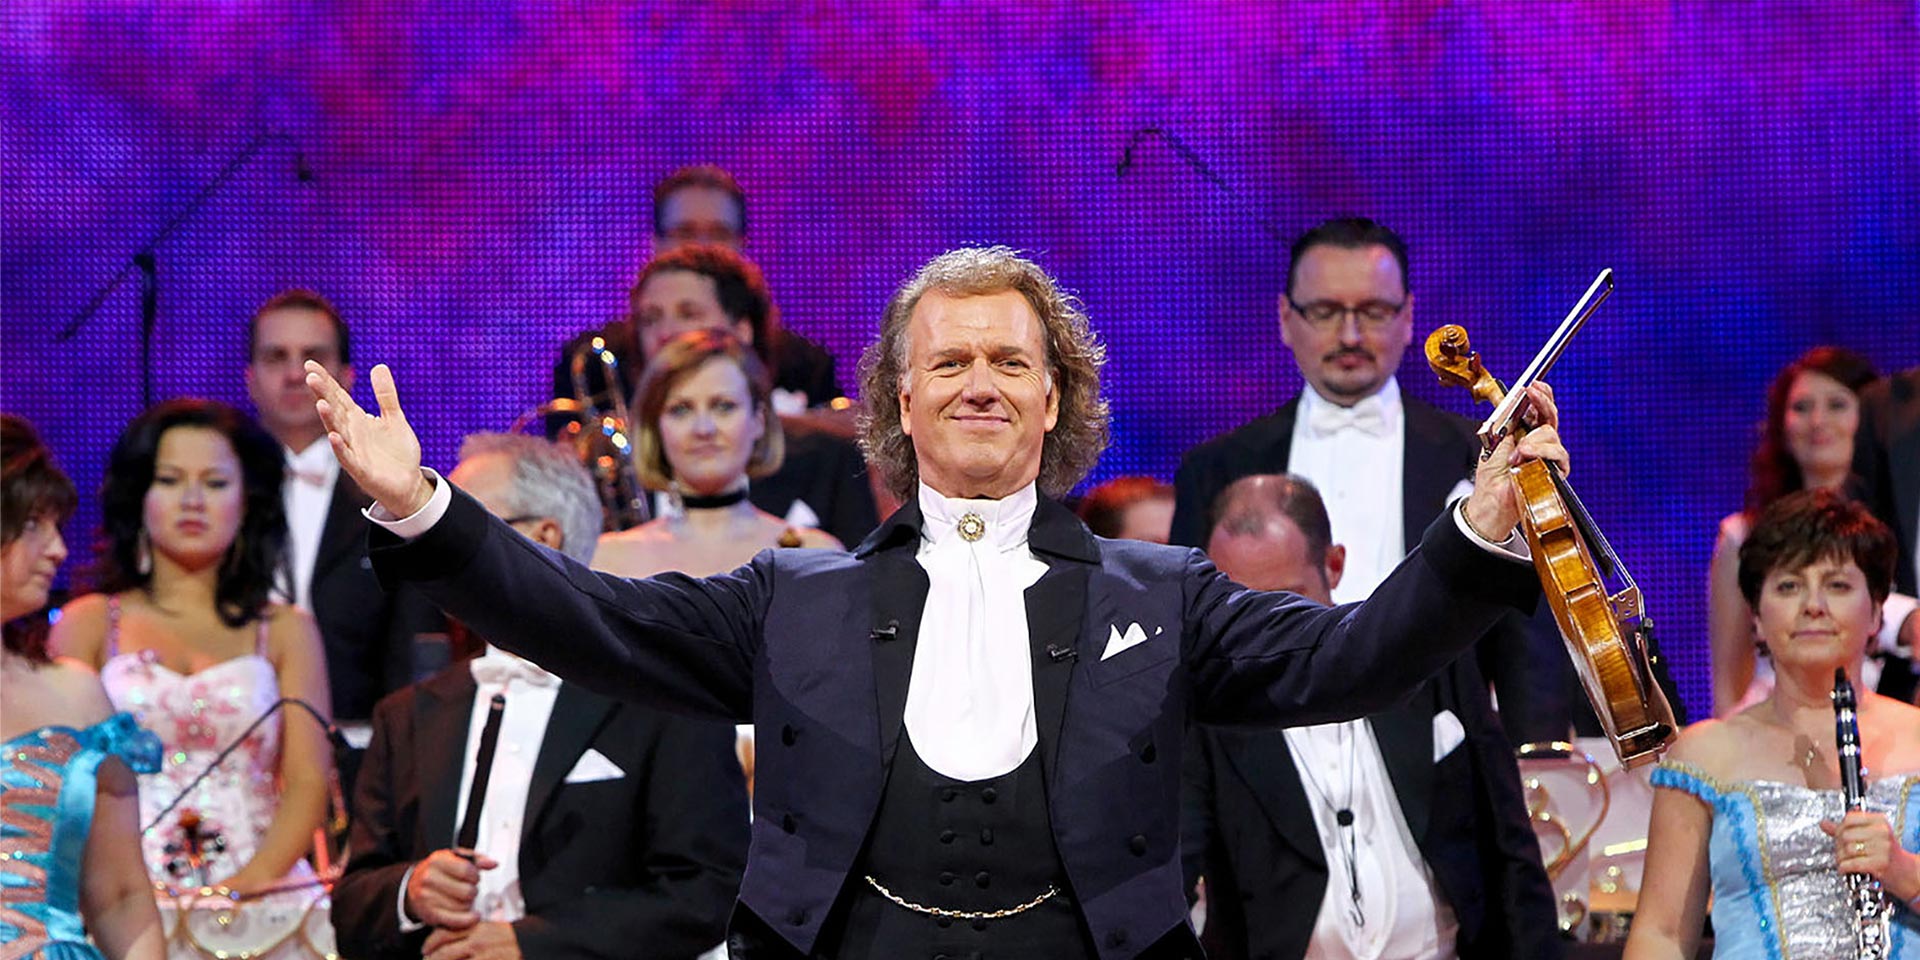 tourhub | Just Go Holidays | André Rieu & his Johann Strauss Orchestra – Live in Birmingham (by Coach) 